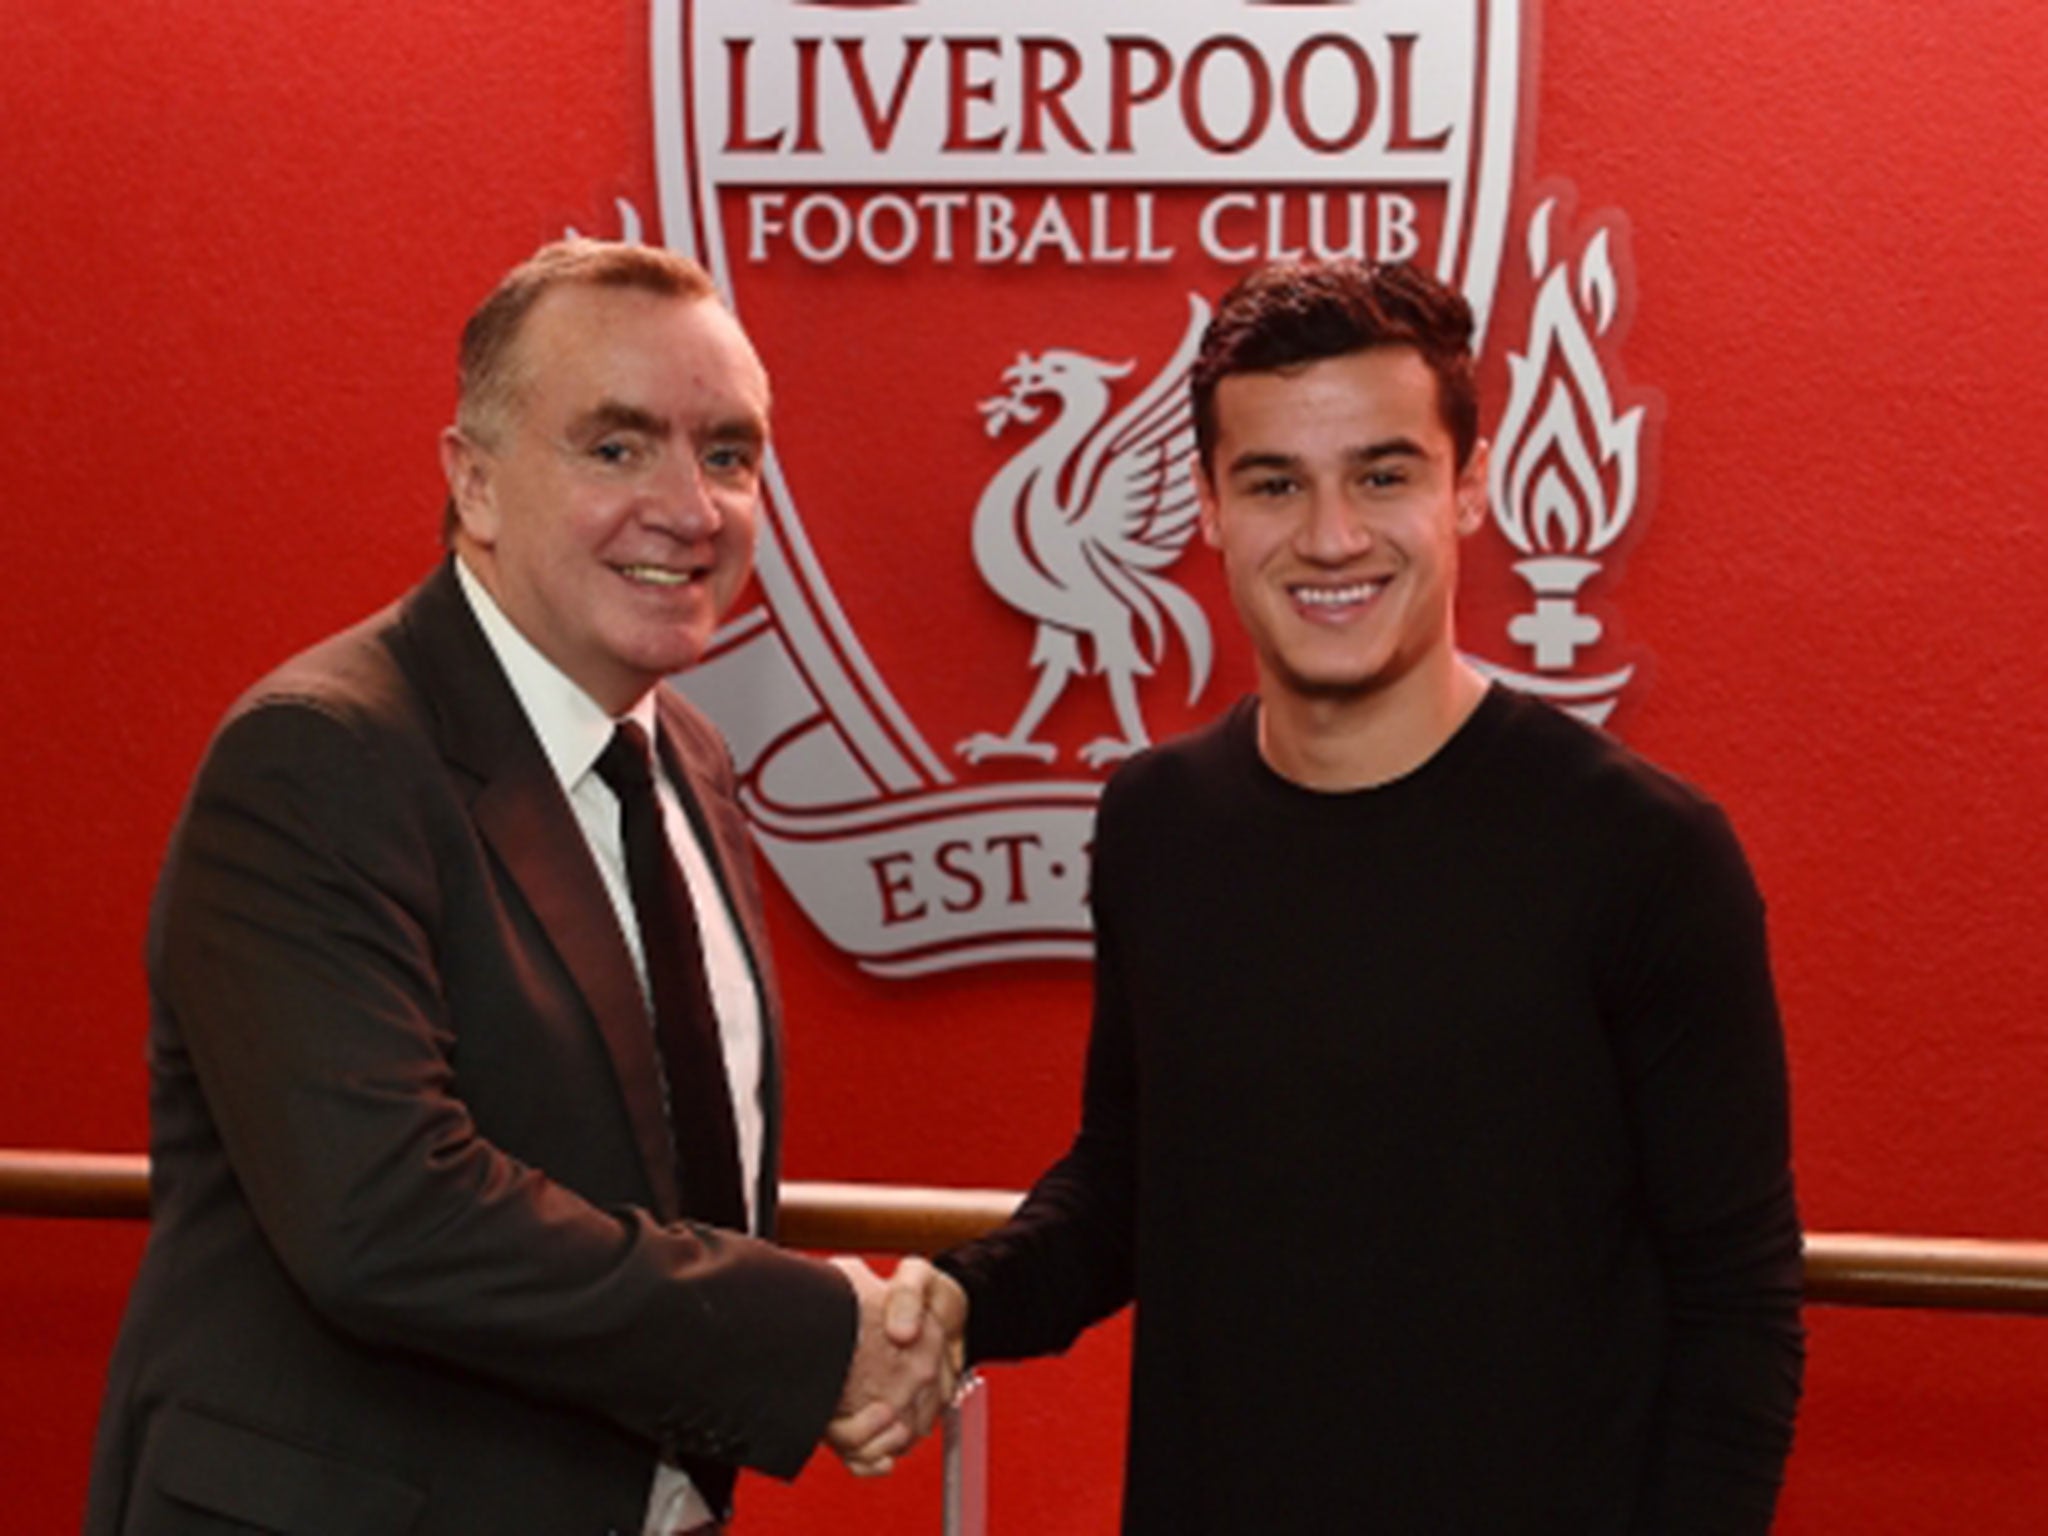 Philippe Coutinho has agreed a new contract with Liverpool